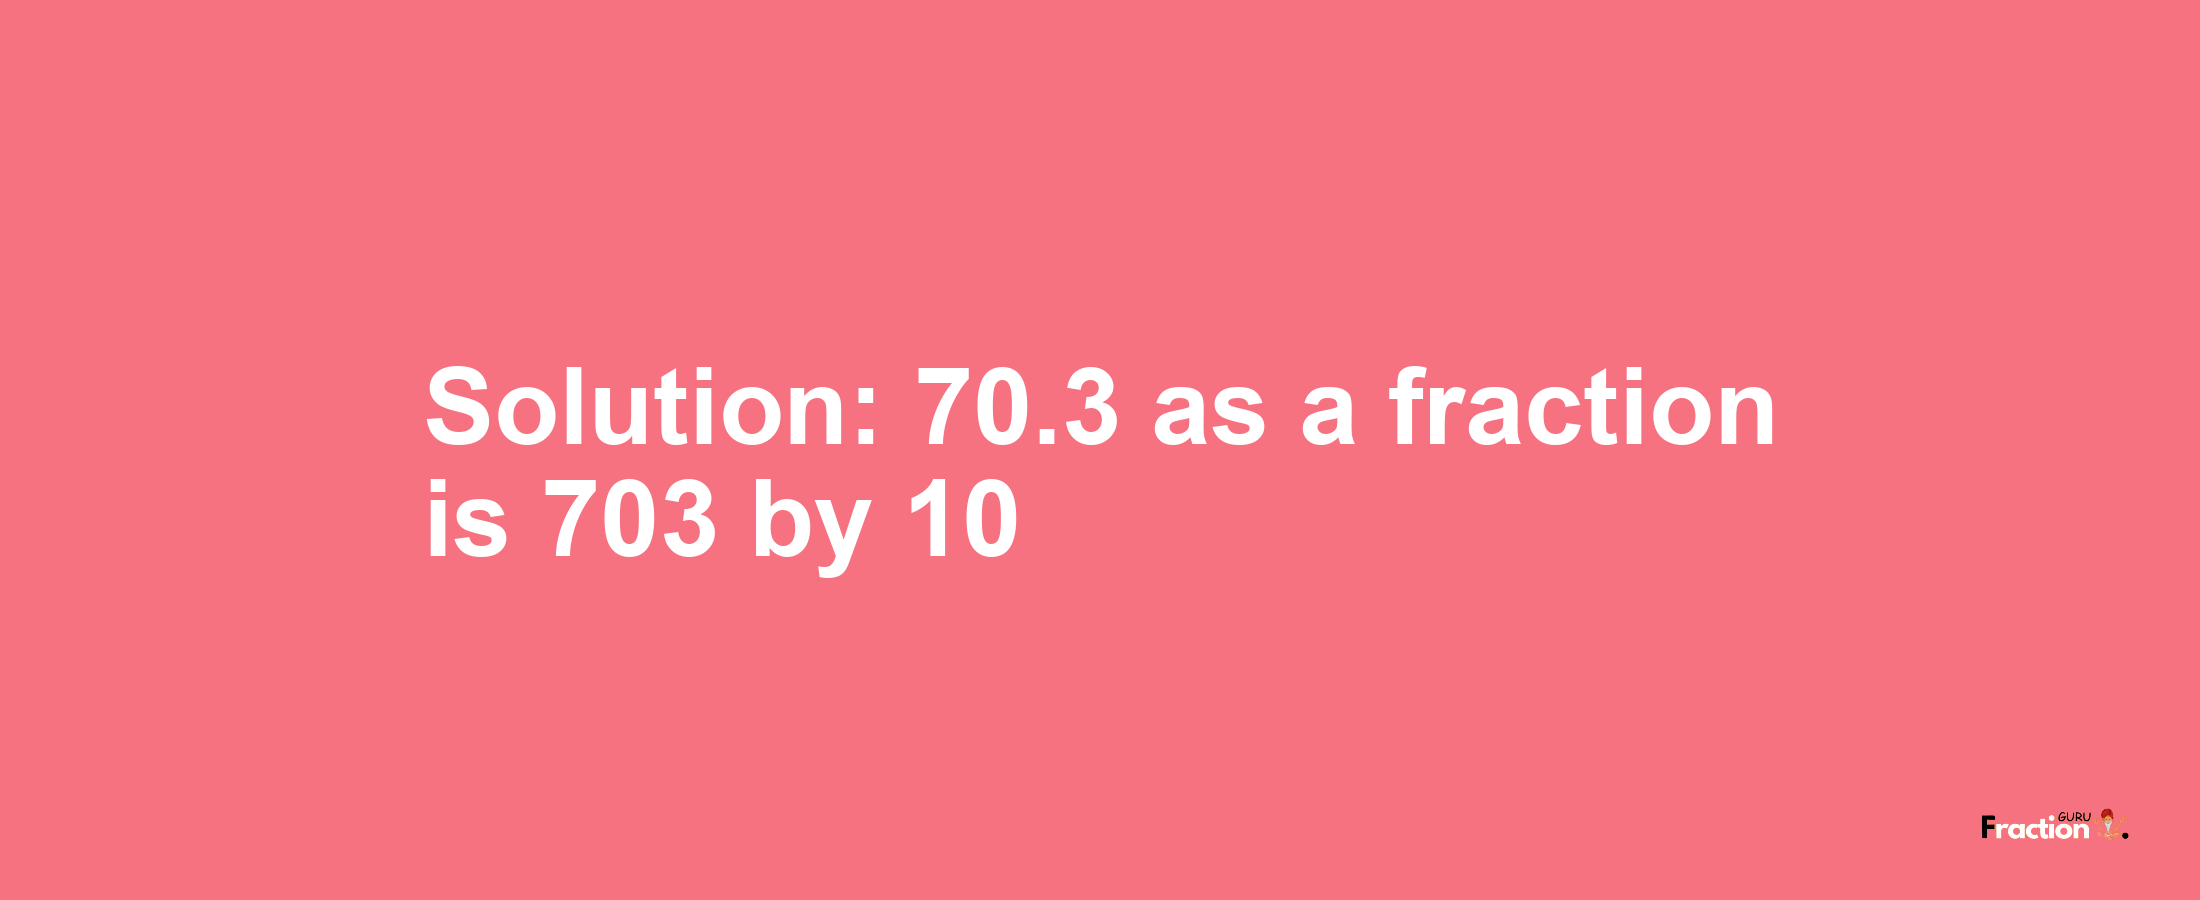 Solution:70.3 as a fraction is 703/10